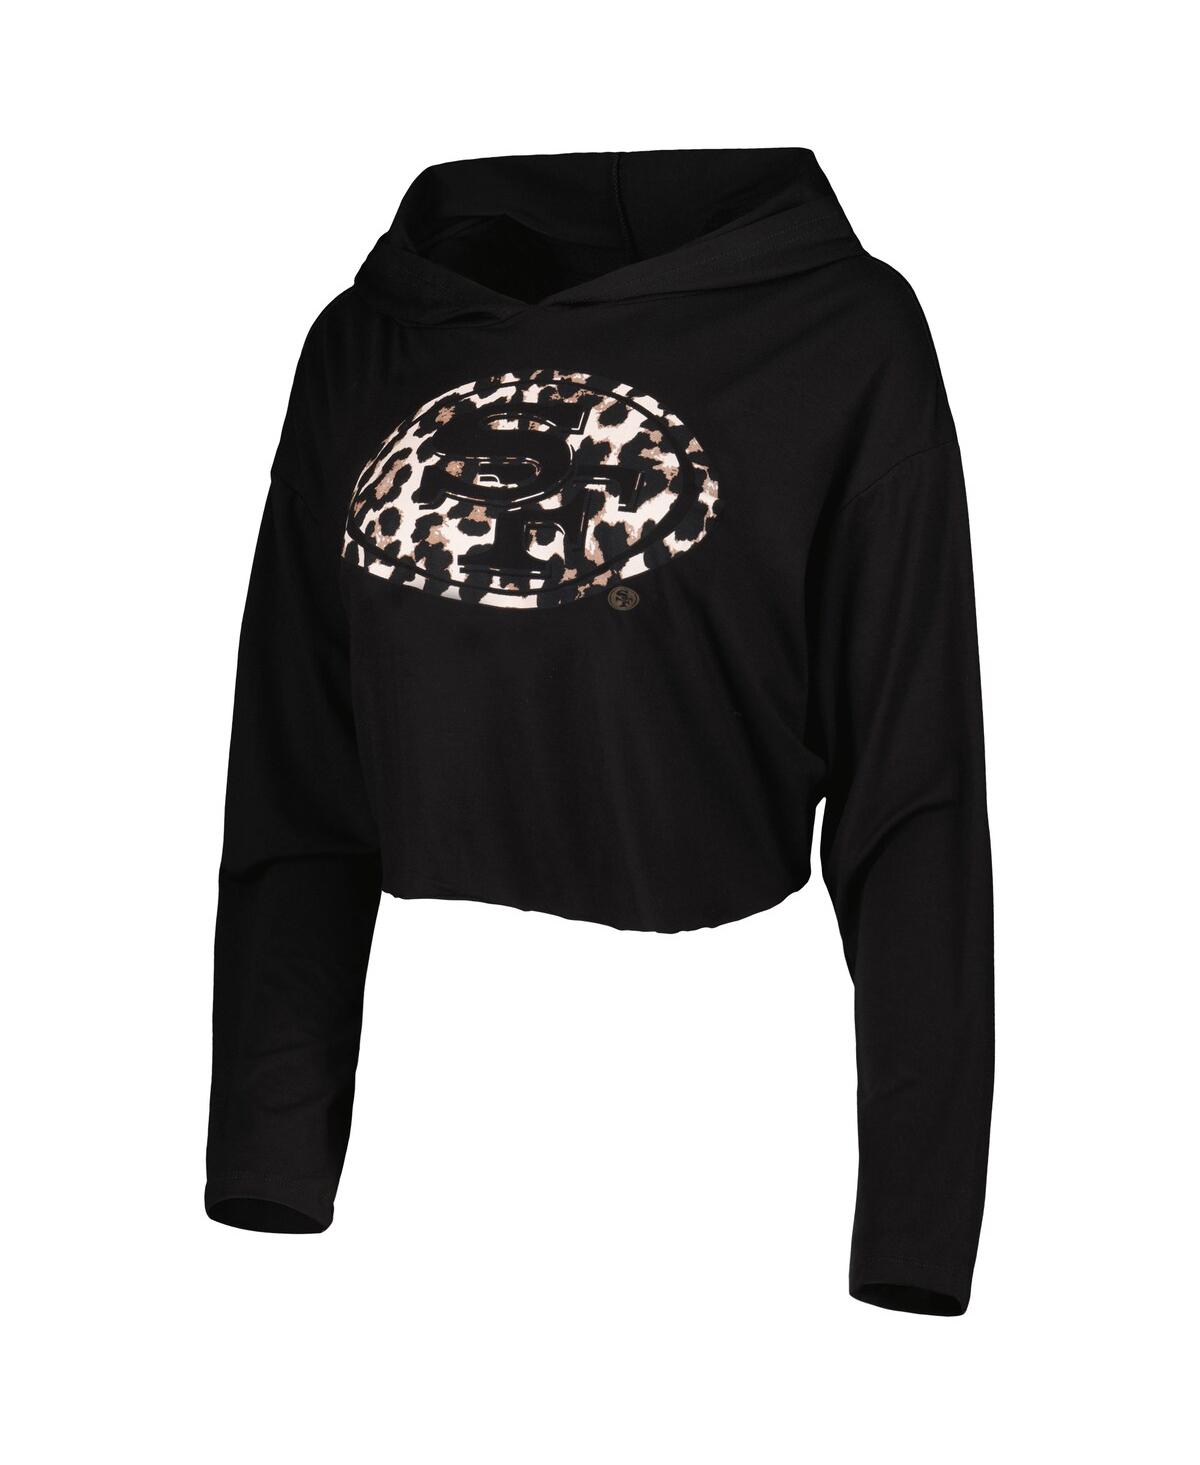 Shop Majestic Women's  Threads Black San Francisco 49ers Leopard Cropped Pullover Hoodie